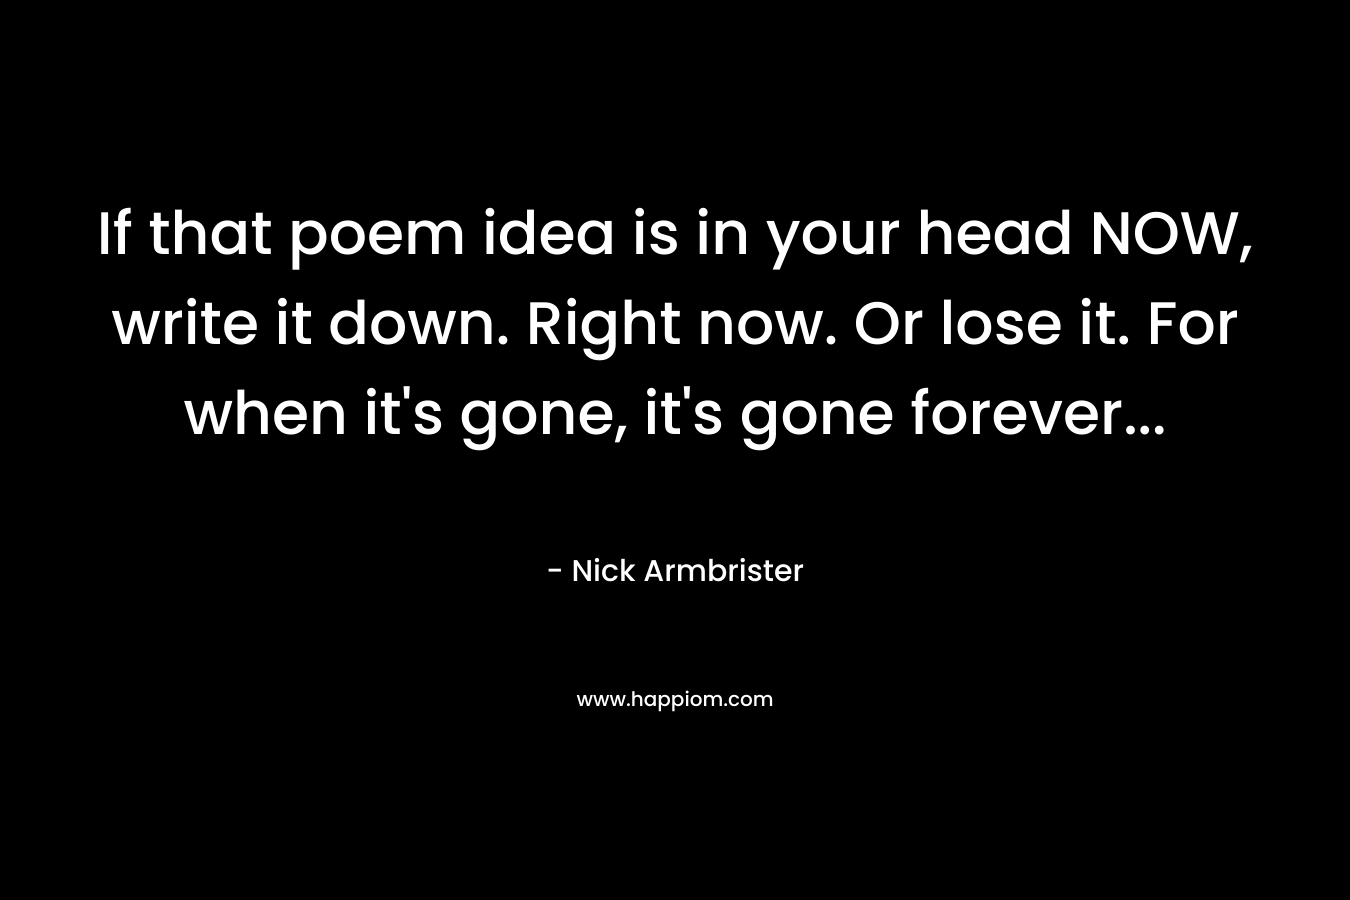 If that poem idea is in your head NOW, write it down. Right now. Or lose it. For when it’s gone, it’s gone forever… – Nick Armbrister